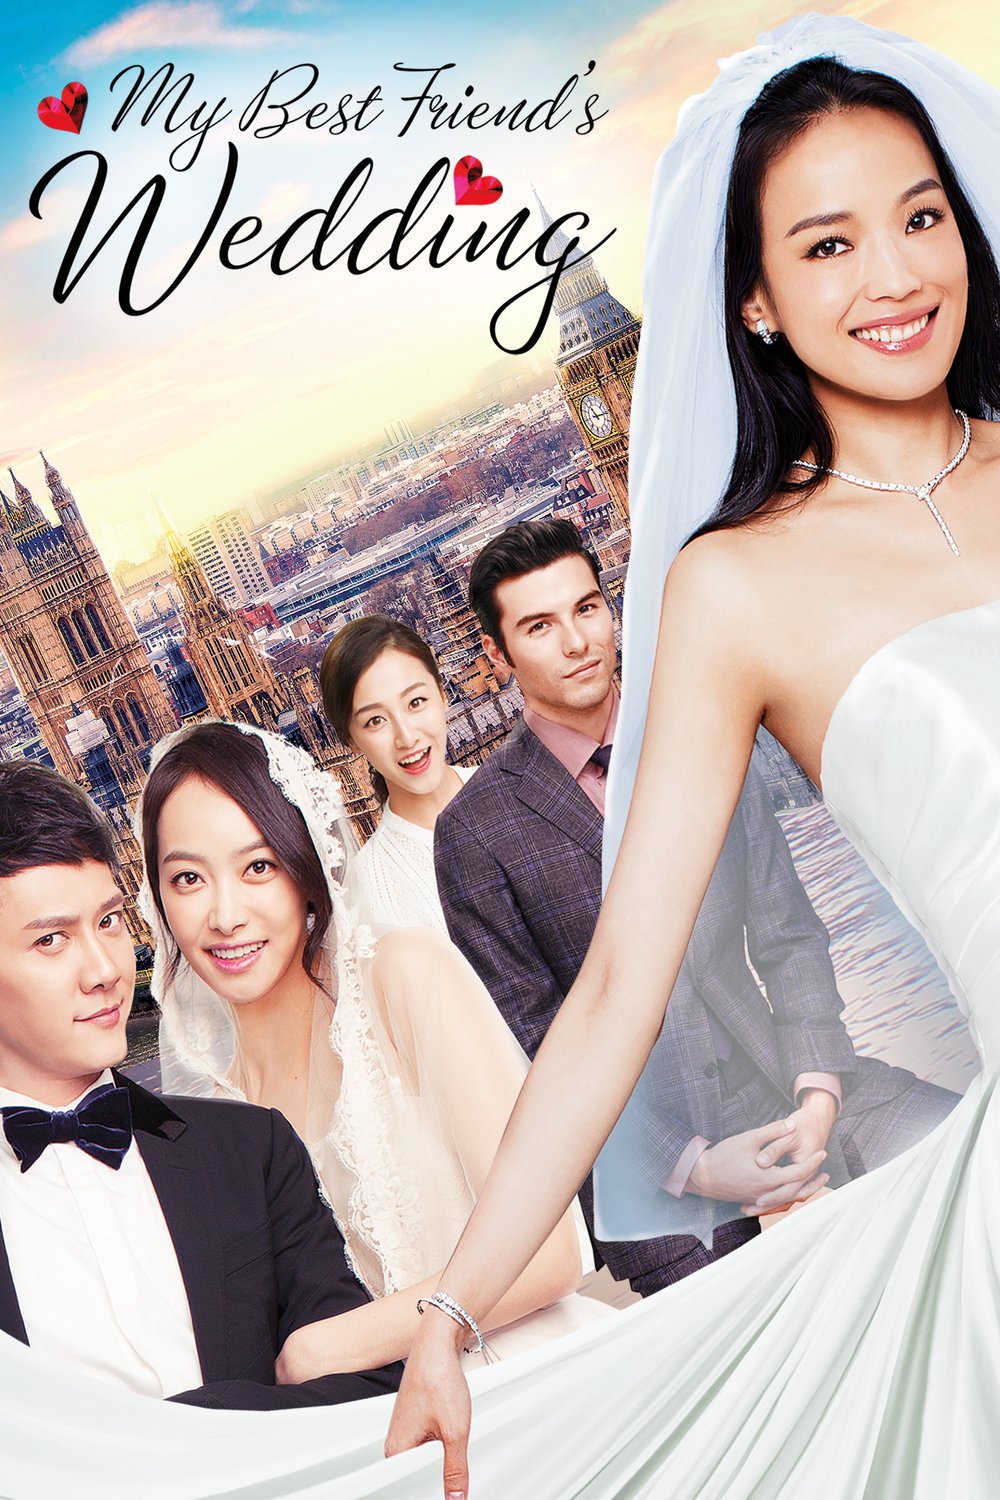 Poster of the movie My Best Friend's Wedding